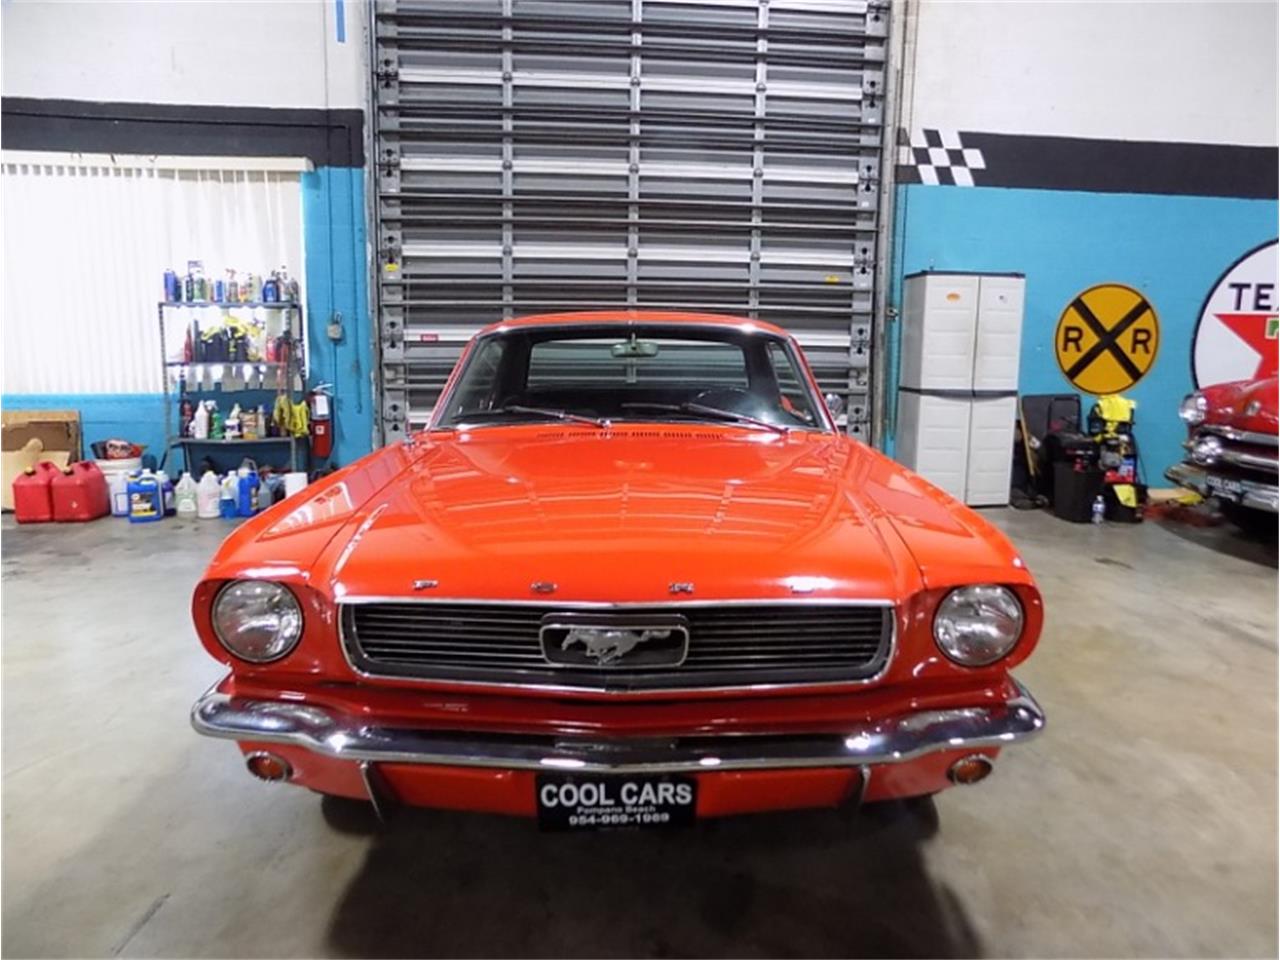 Ford Mustang V8 c code 289 1966 prix tout compris